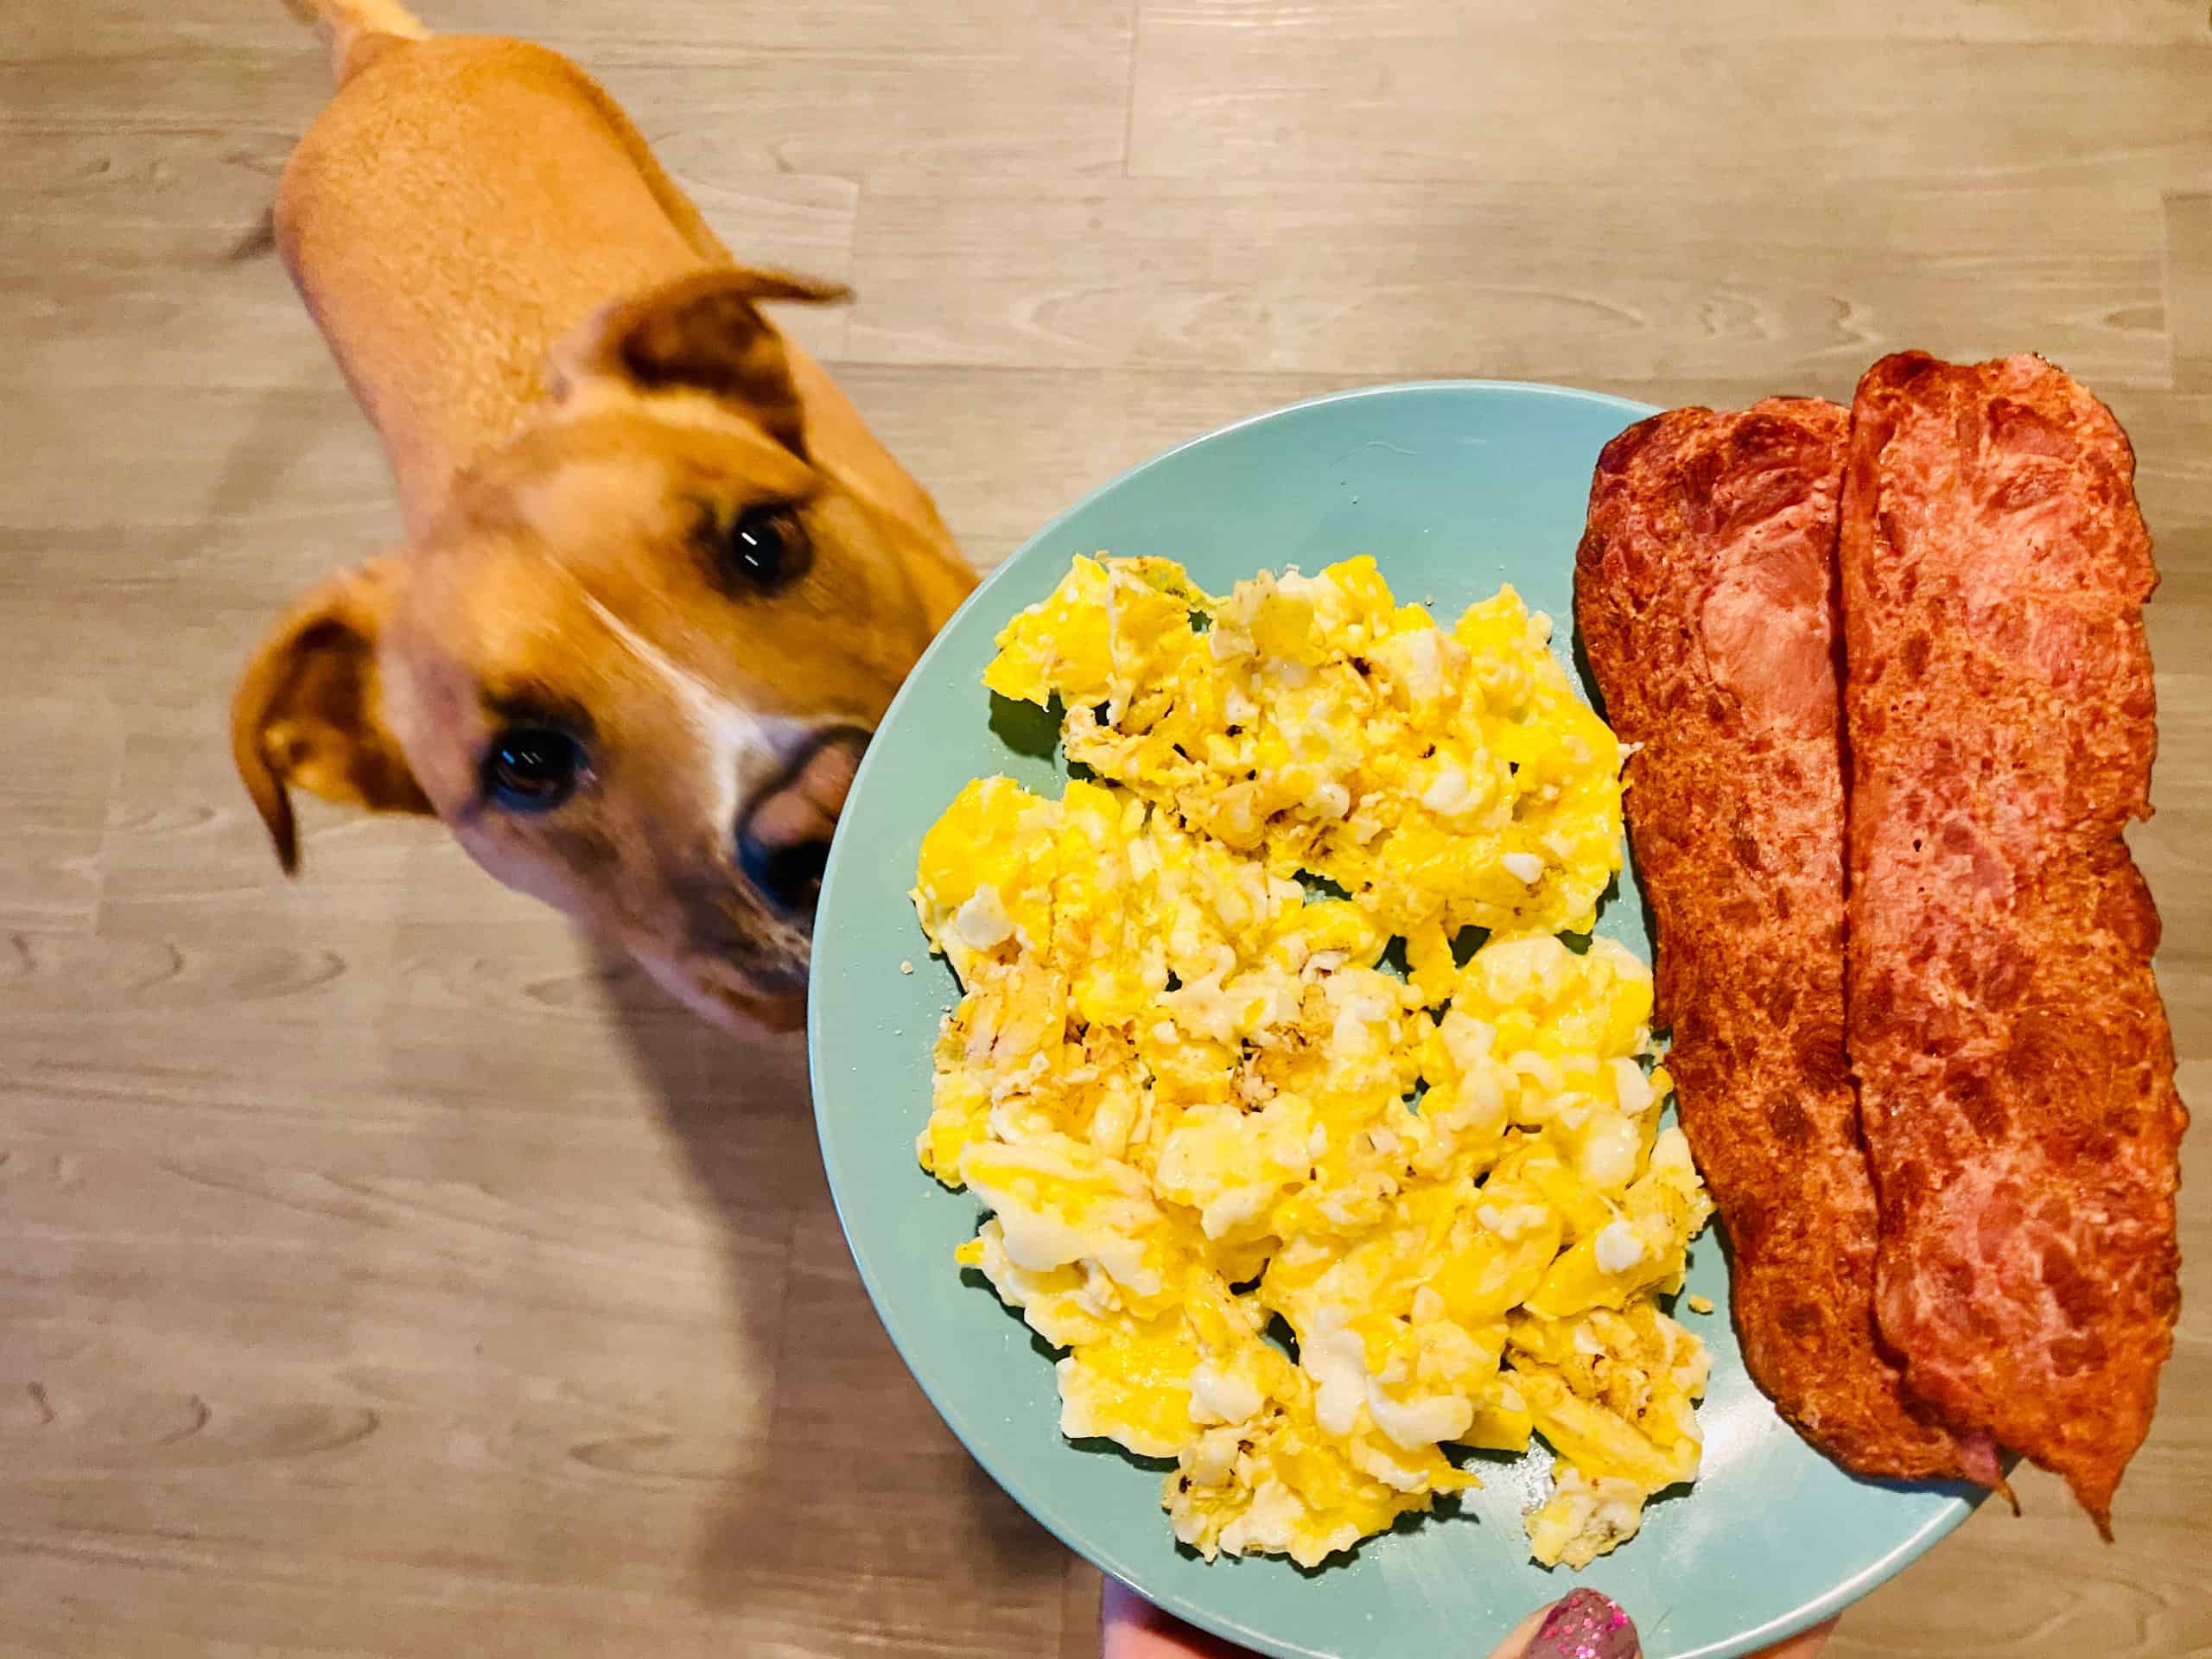 Dog hoping to get some breakfast